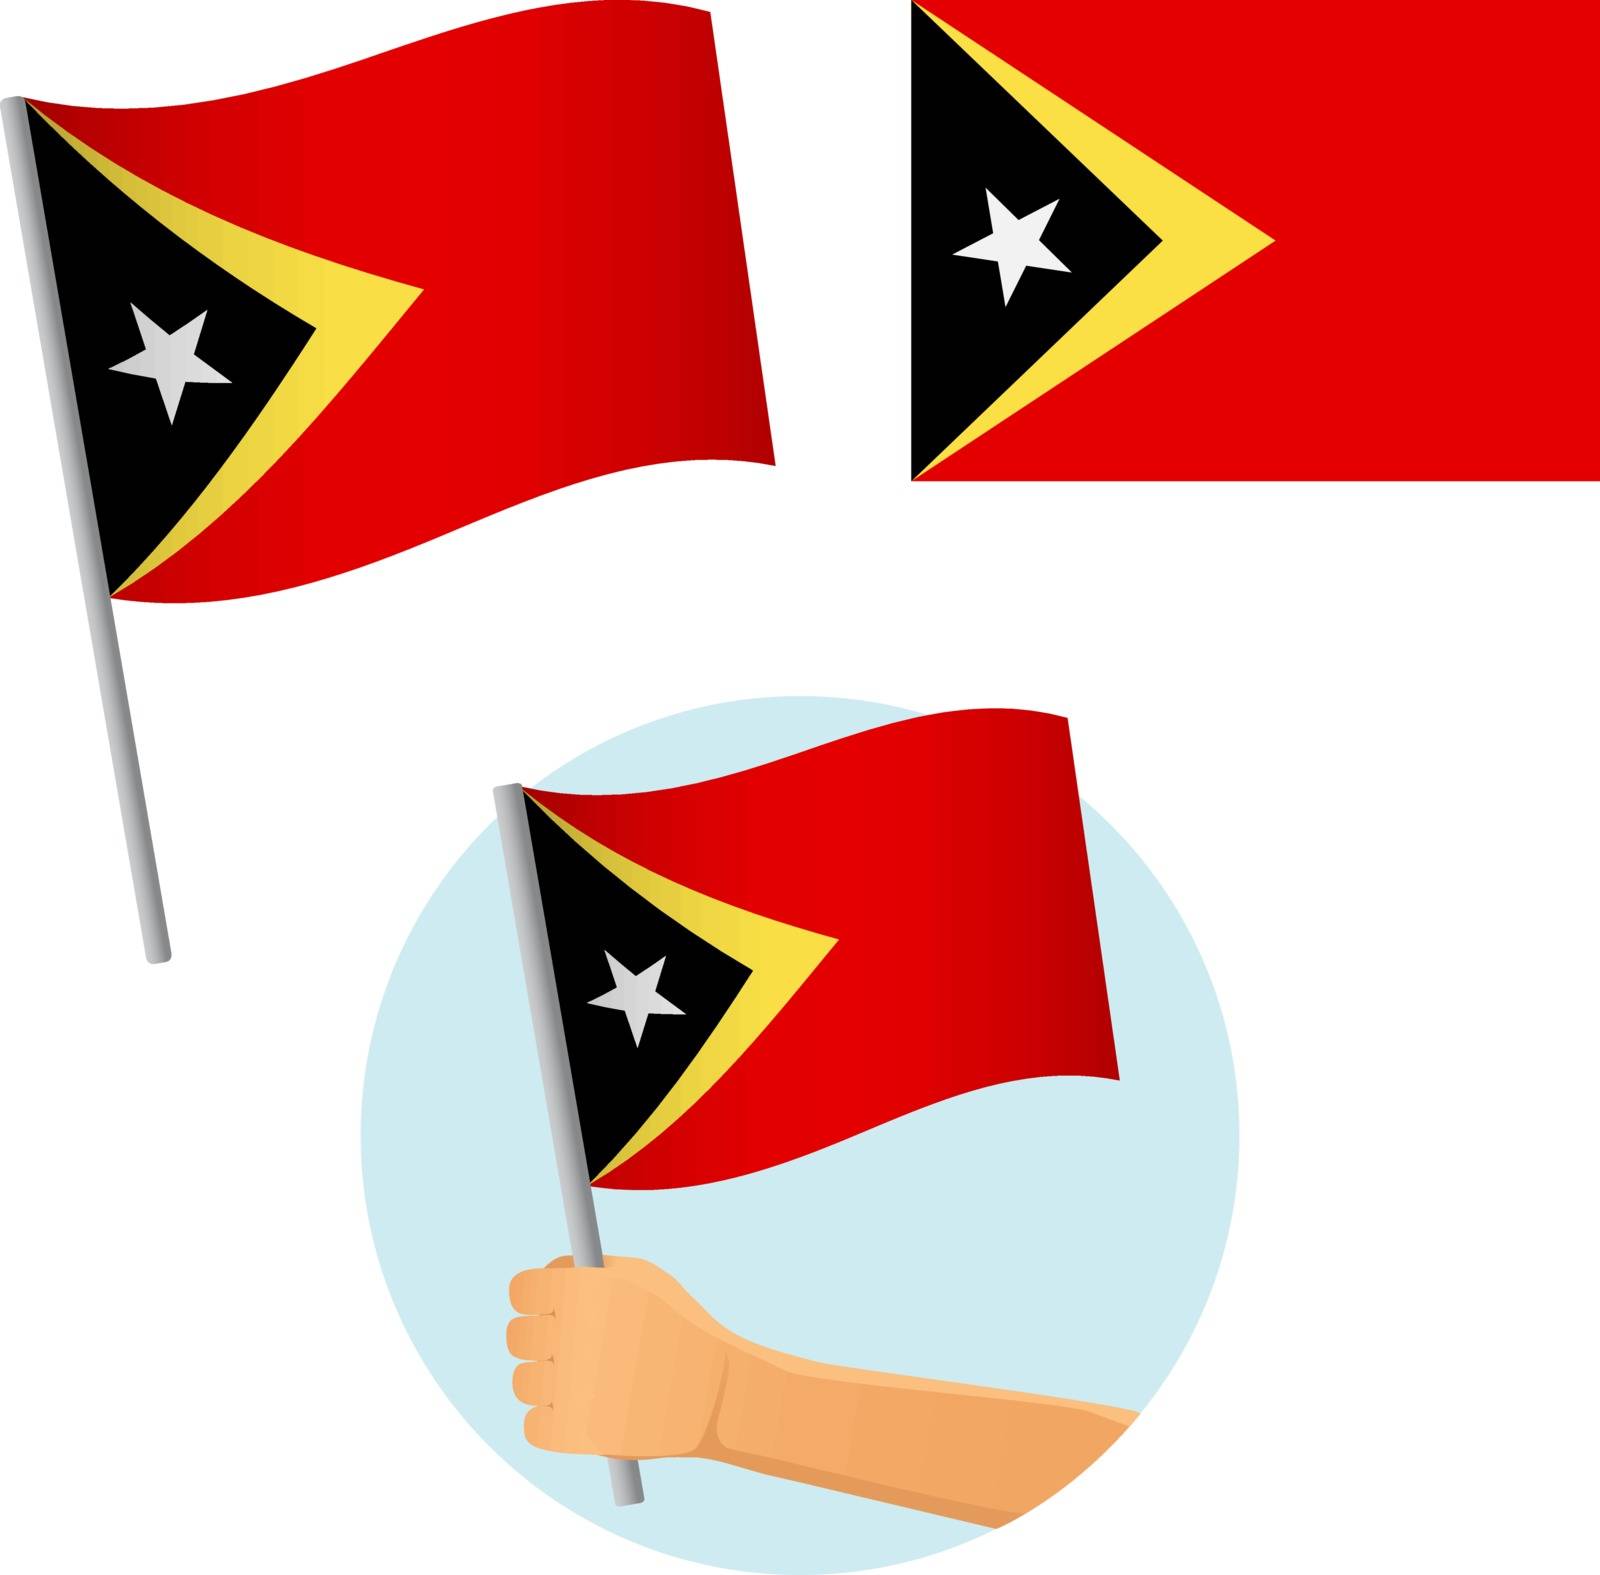 East Timor flag in hand by Visual-Content